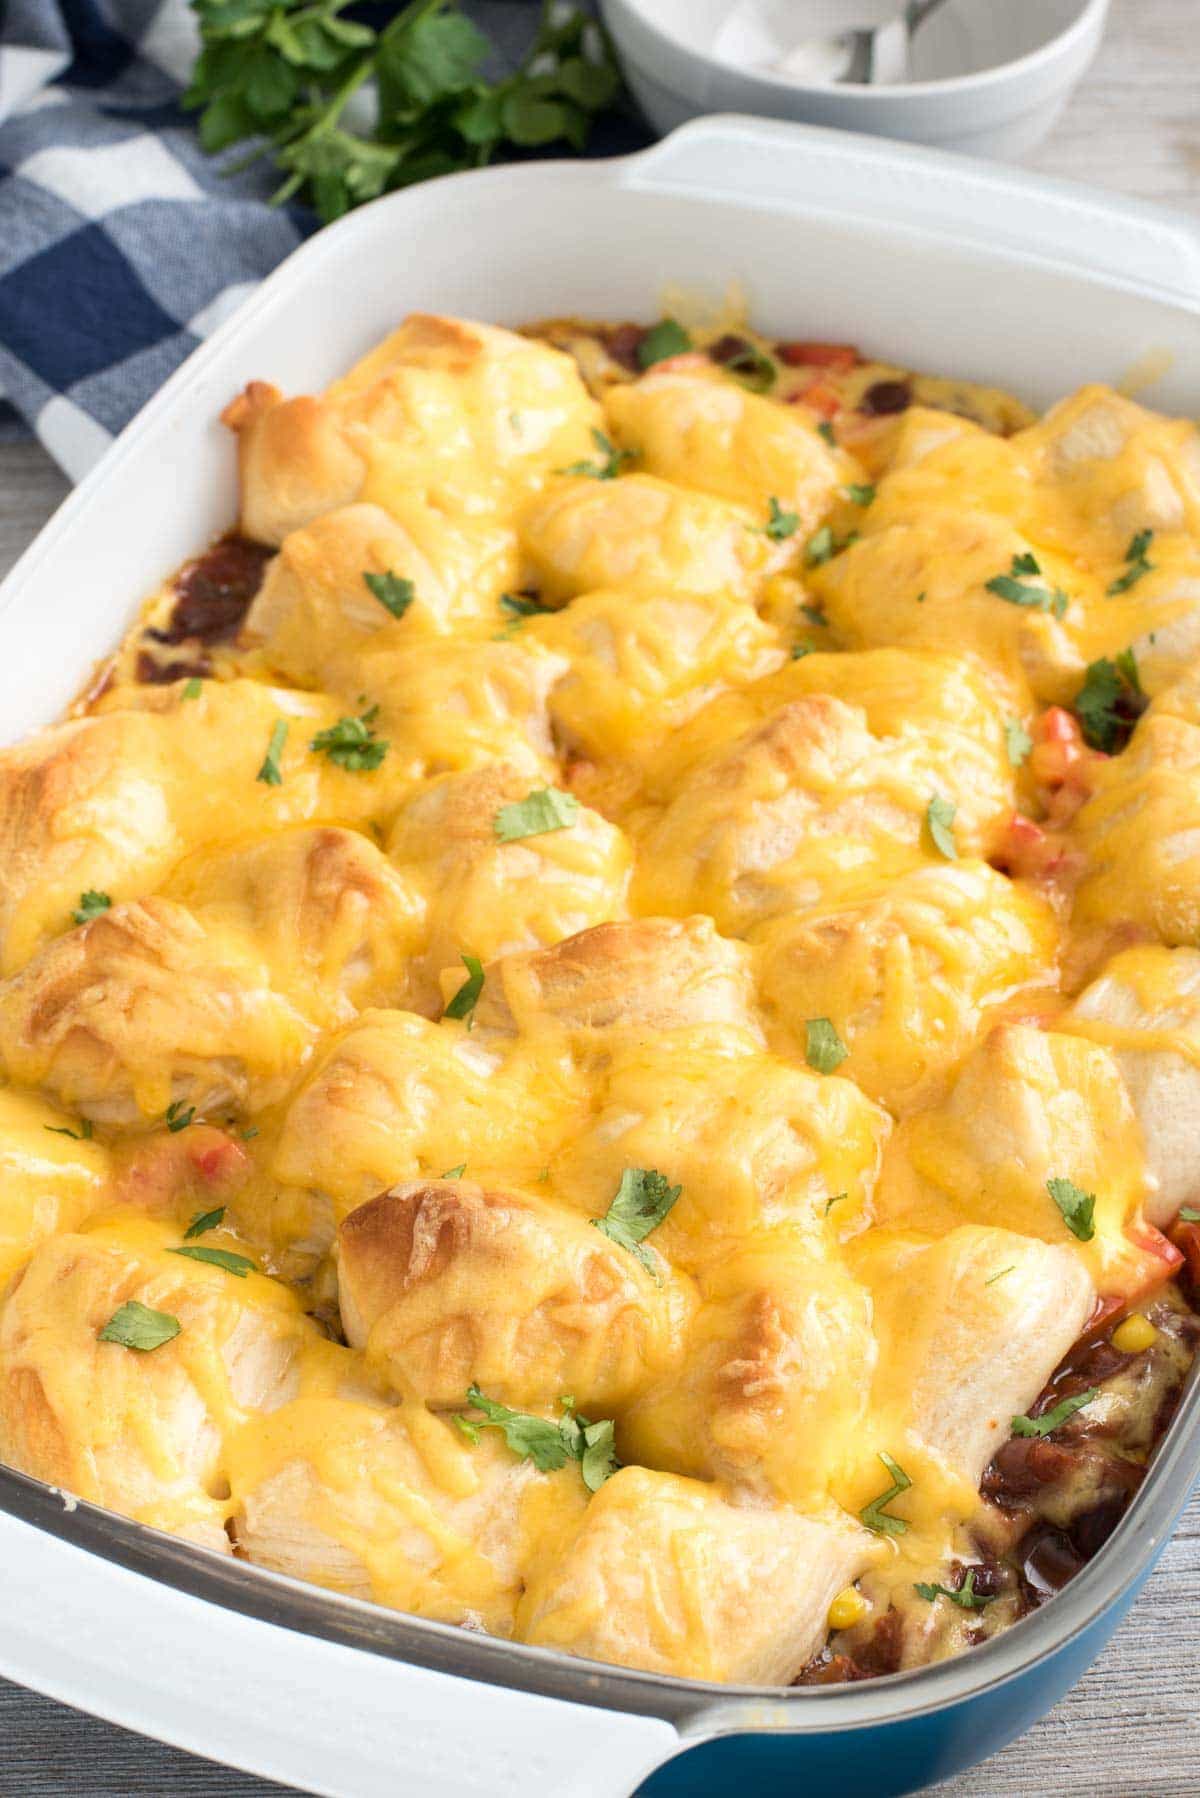 Easy Cheesy Chili Biscuit Bake - this easy weeknight dinner recipe has just 5 ingredients! Chili is topped with vegetables, biscuits, and cheese then baked up for a delicious comfort food meal.